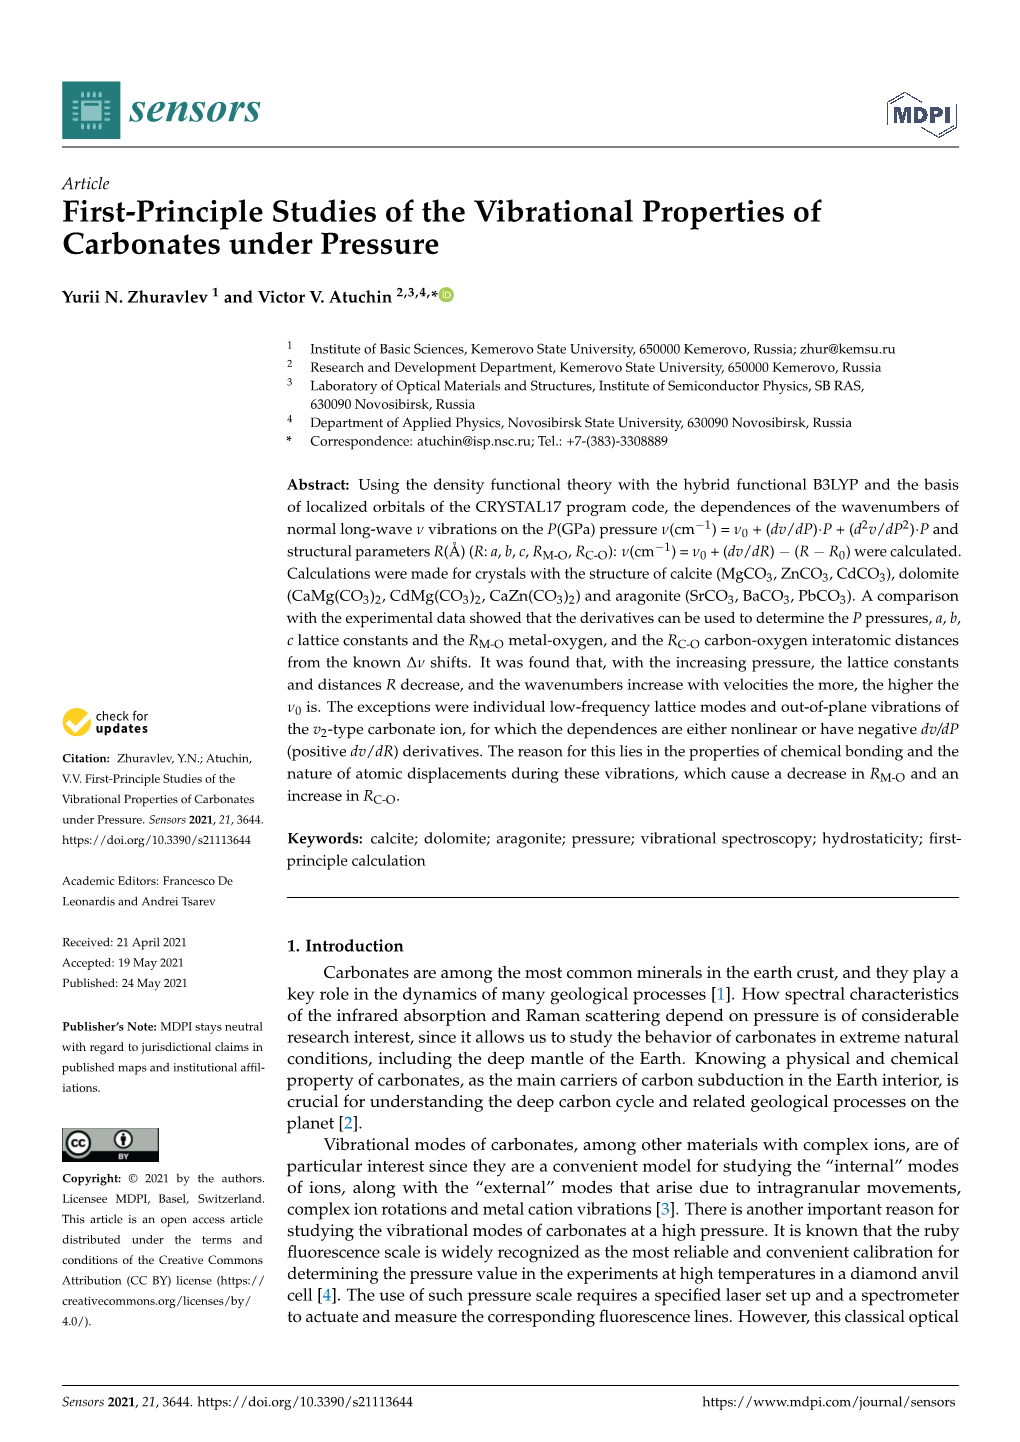 First-Principle Studies of the Vibrational Properties of Carbonates Under Pressure